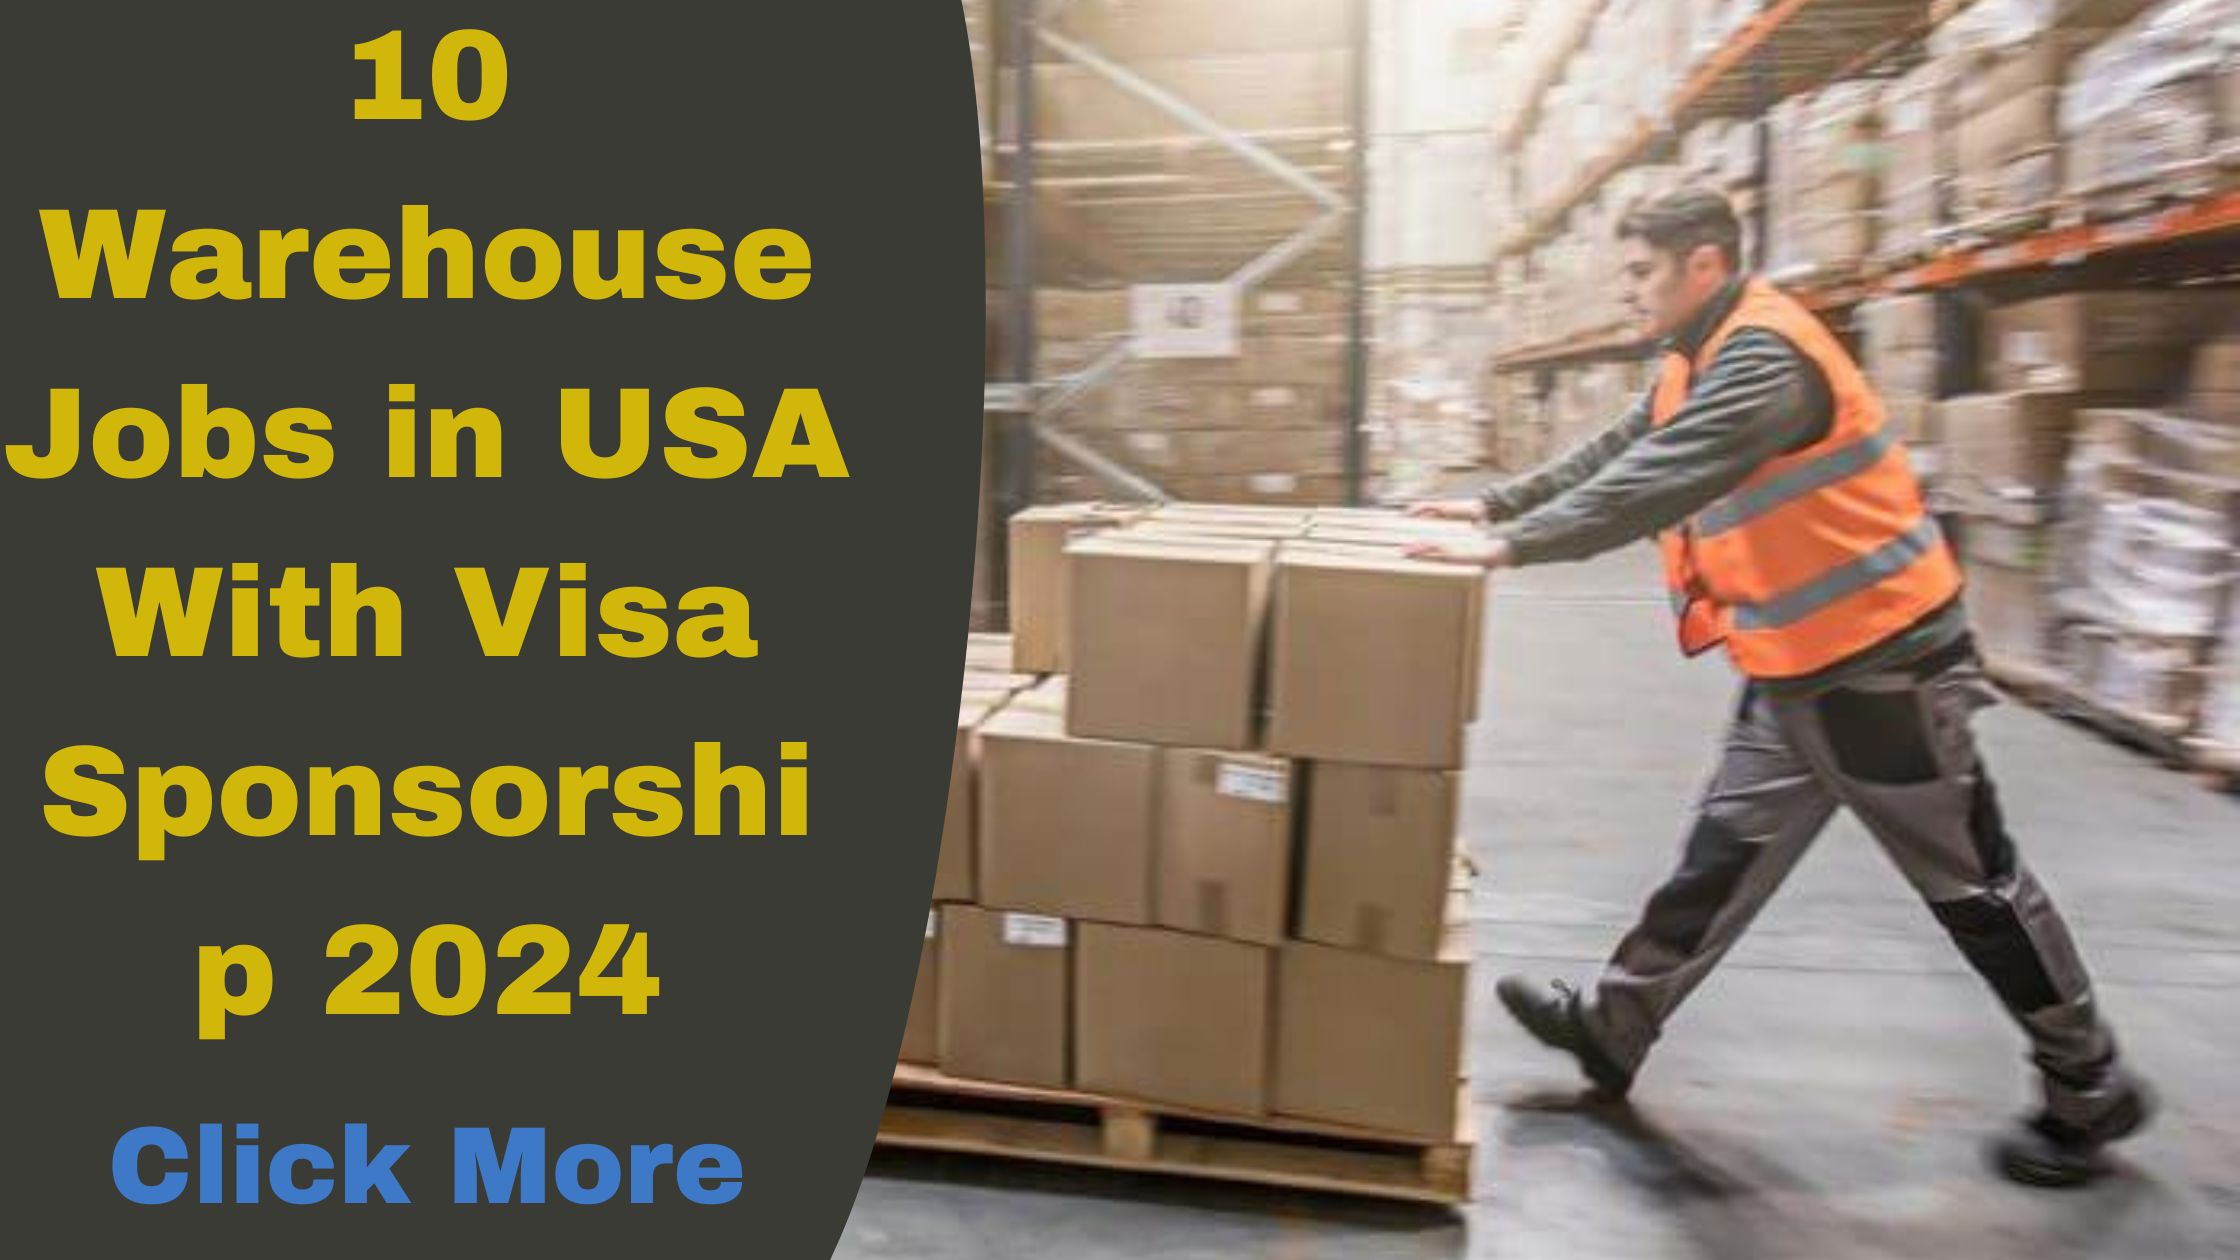 Warehouse Jobs in USA With Visa Sponsorship